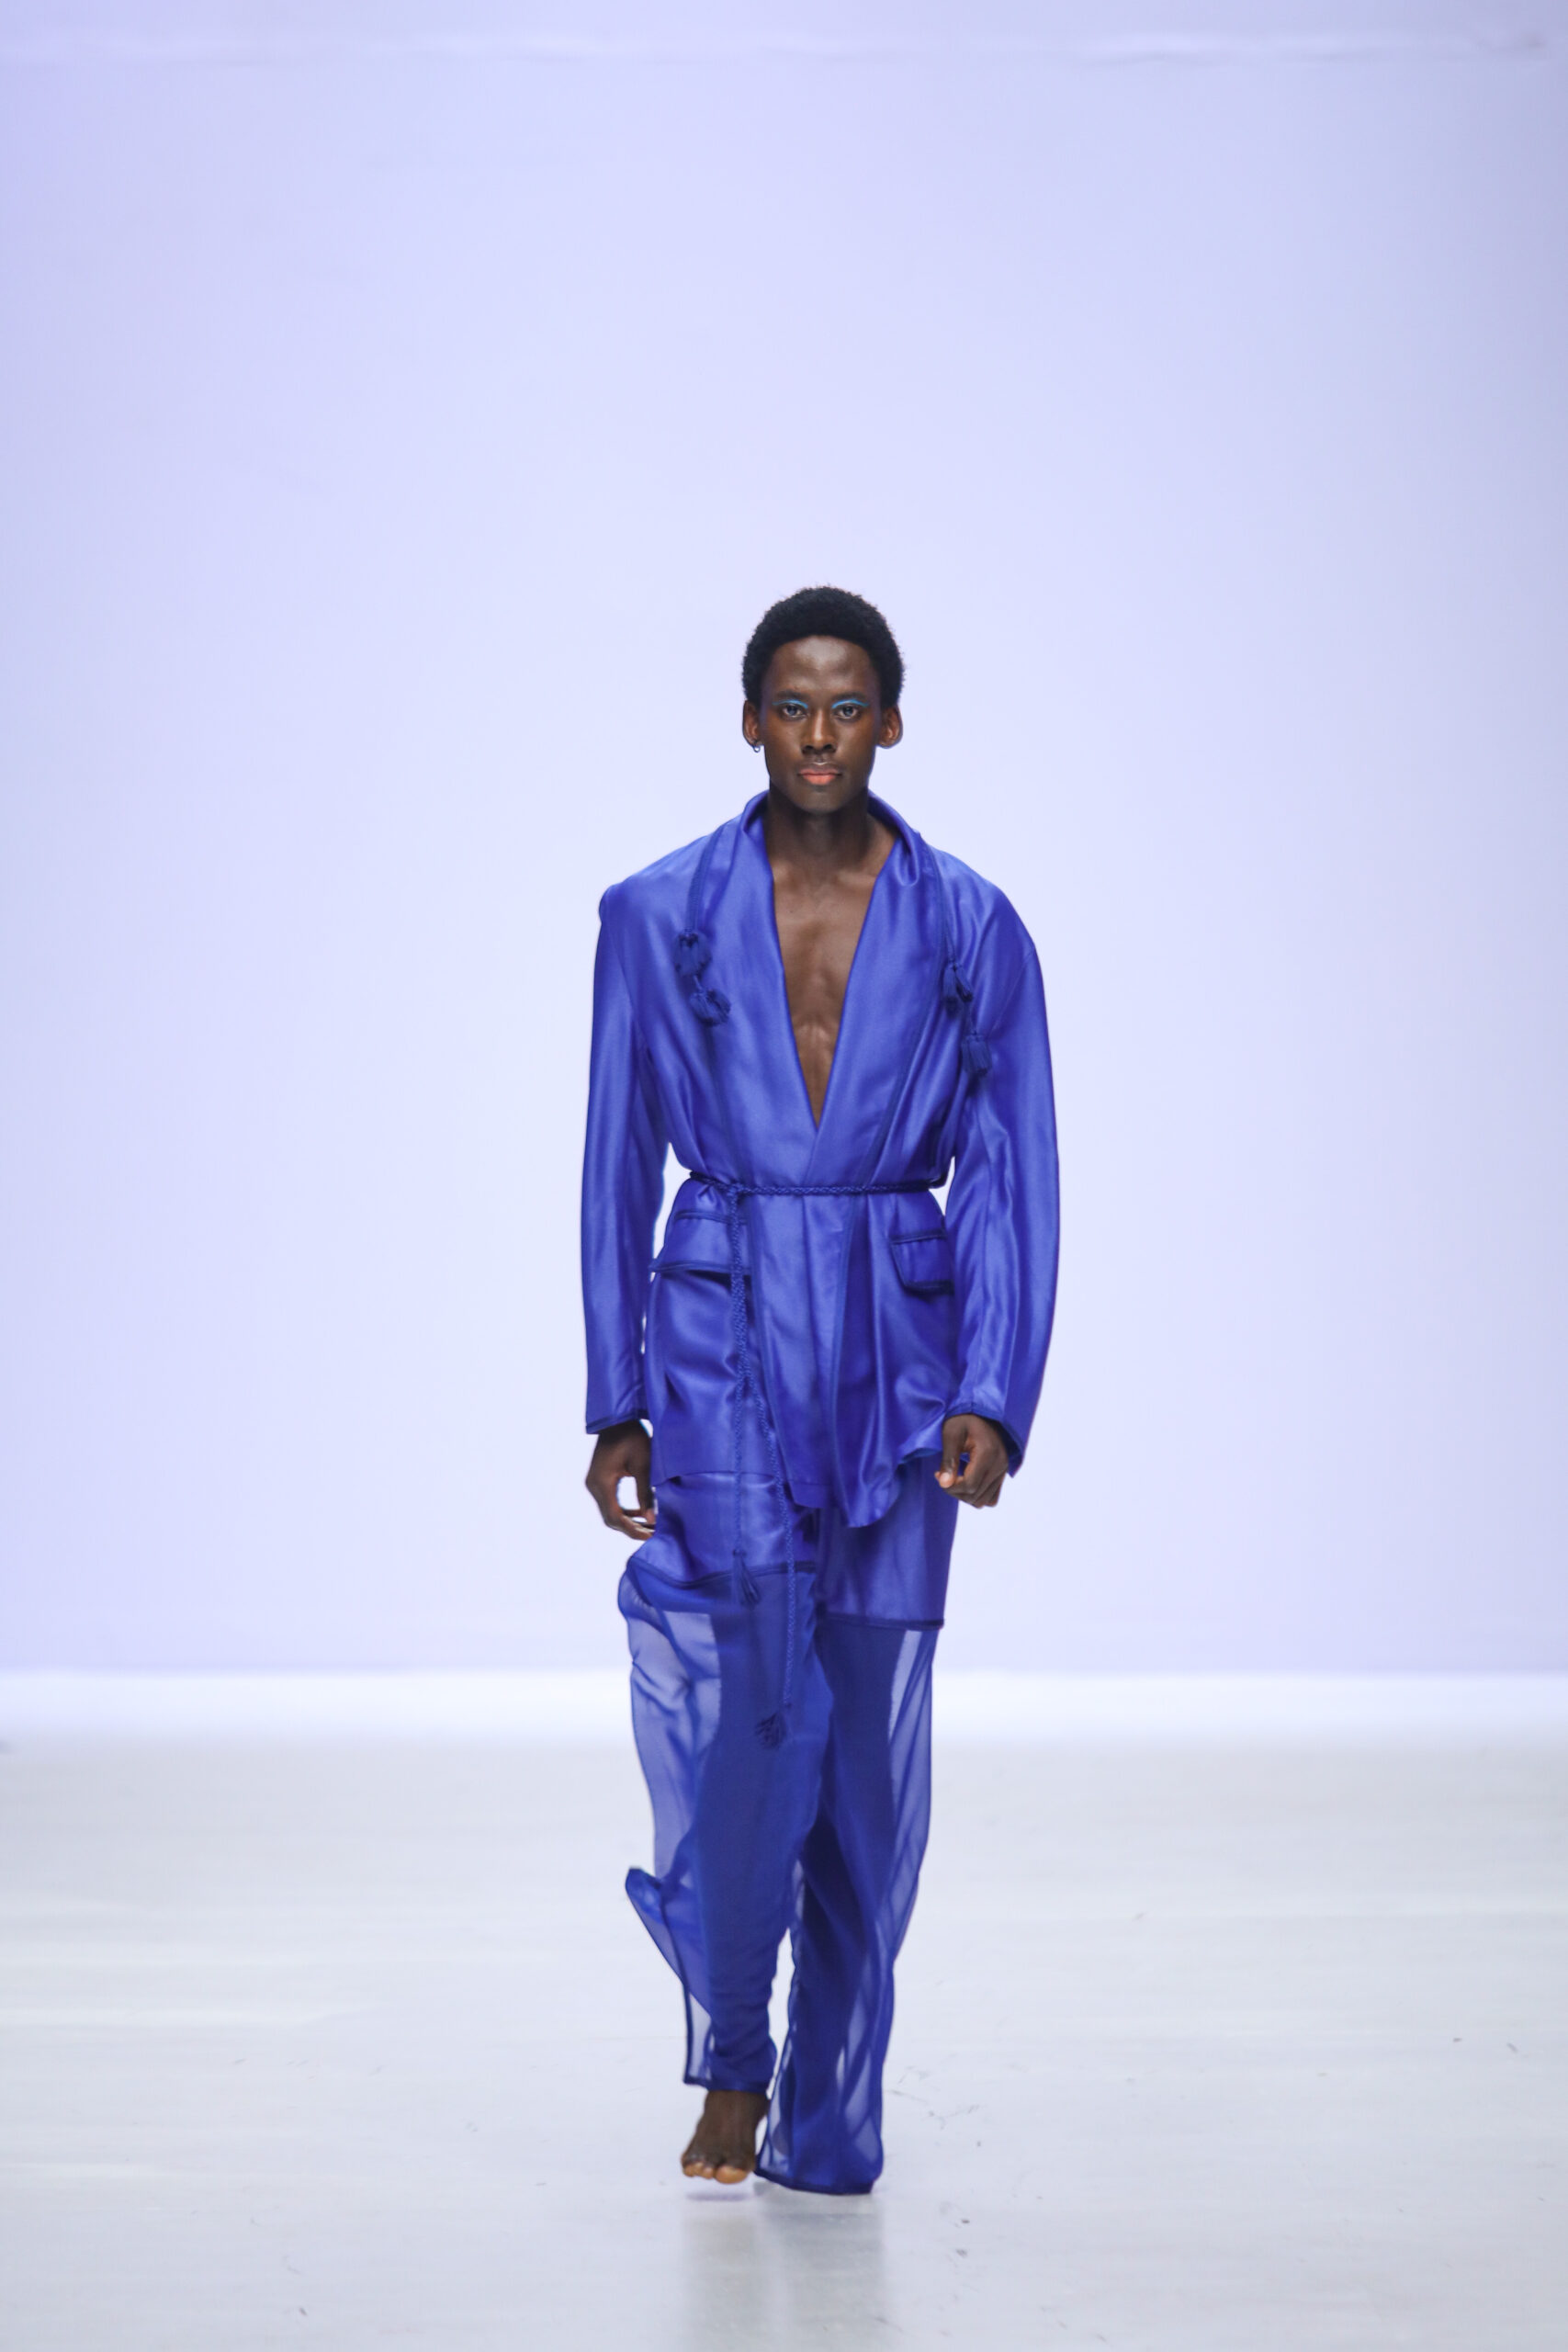 Look one from LFW's green access 2022 finalist - Sahrzad designs